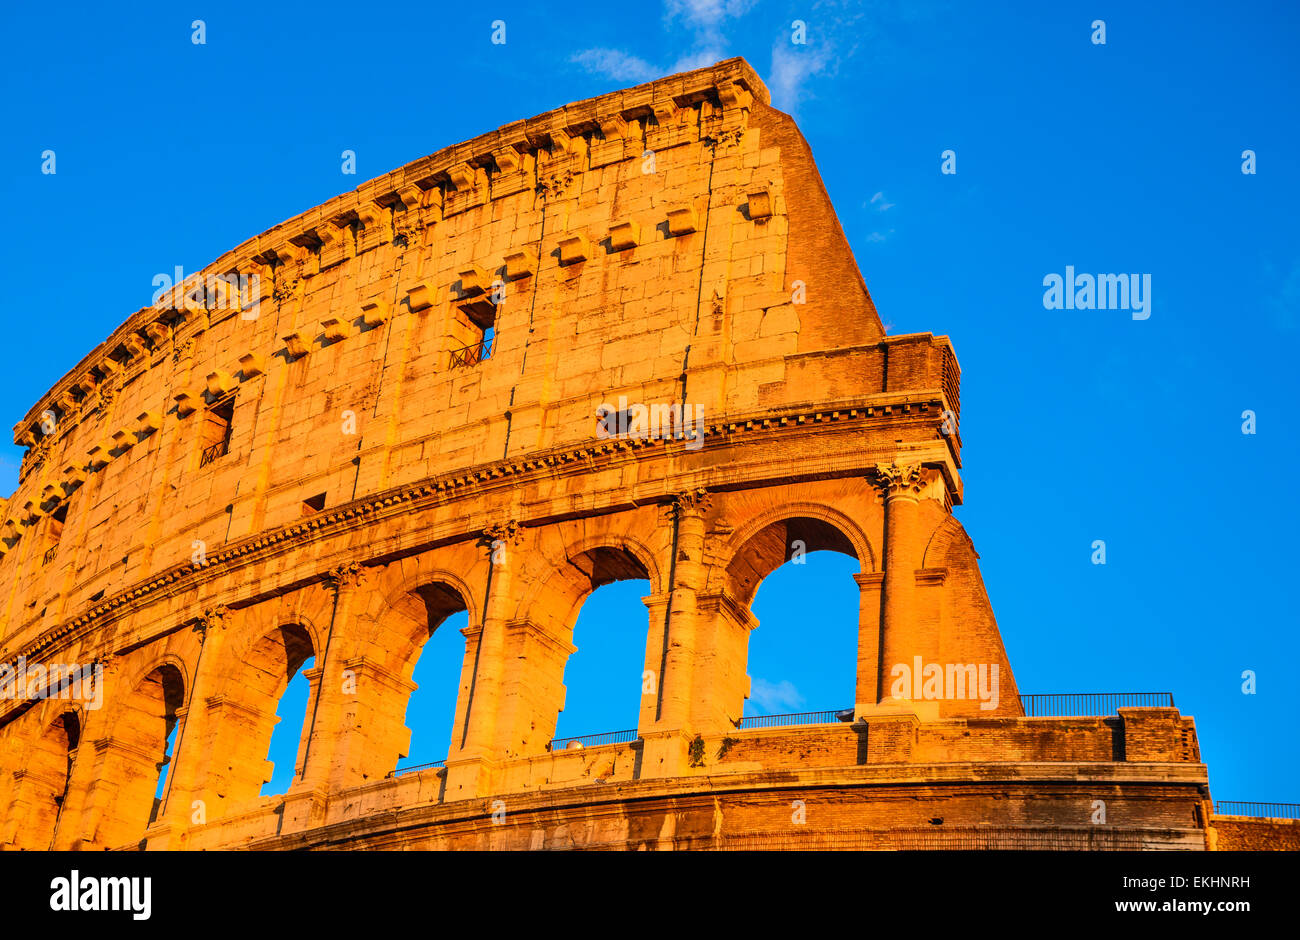 Rome, Italy. Sunset with Coliseum, Coloseo. Colosseum ruins of ancient amphitheatre largest in Roman Empire. Stock Photo